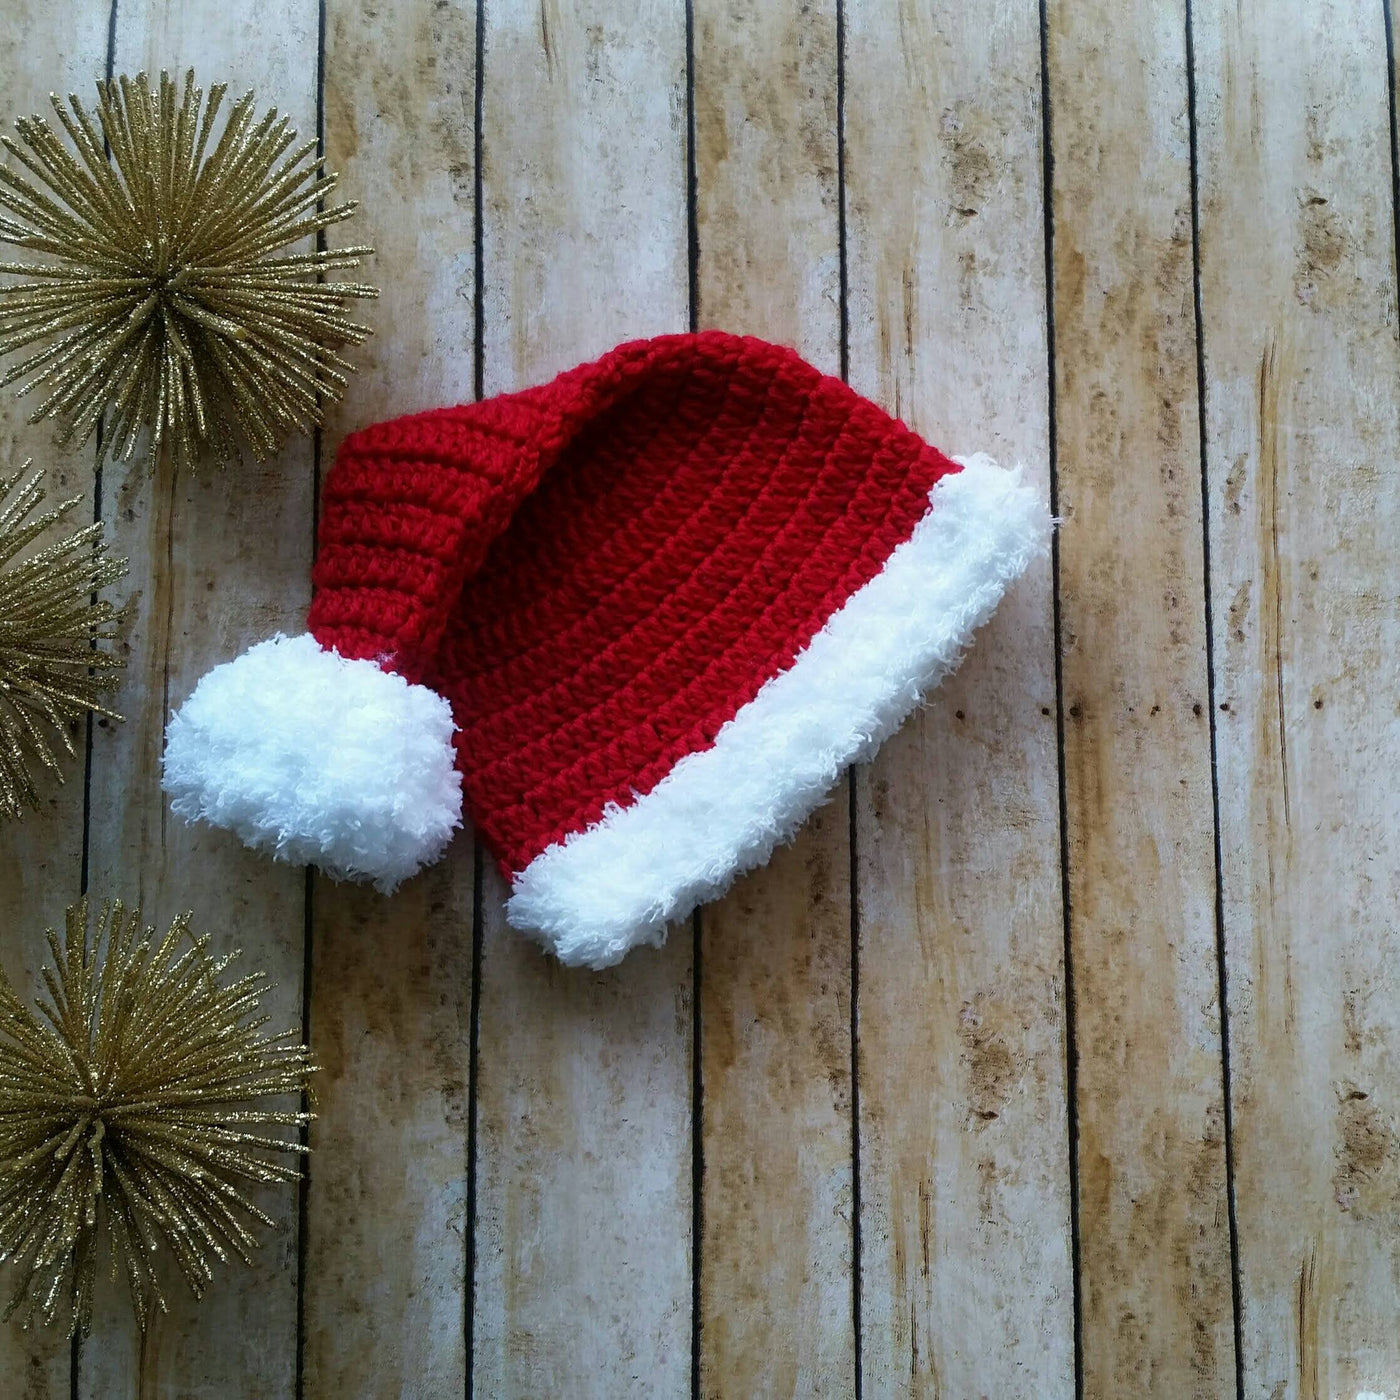 Christmas Baby Outfit, Crochet Baby Outfit, Newborn Santa Outfit